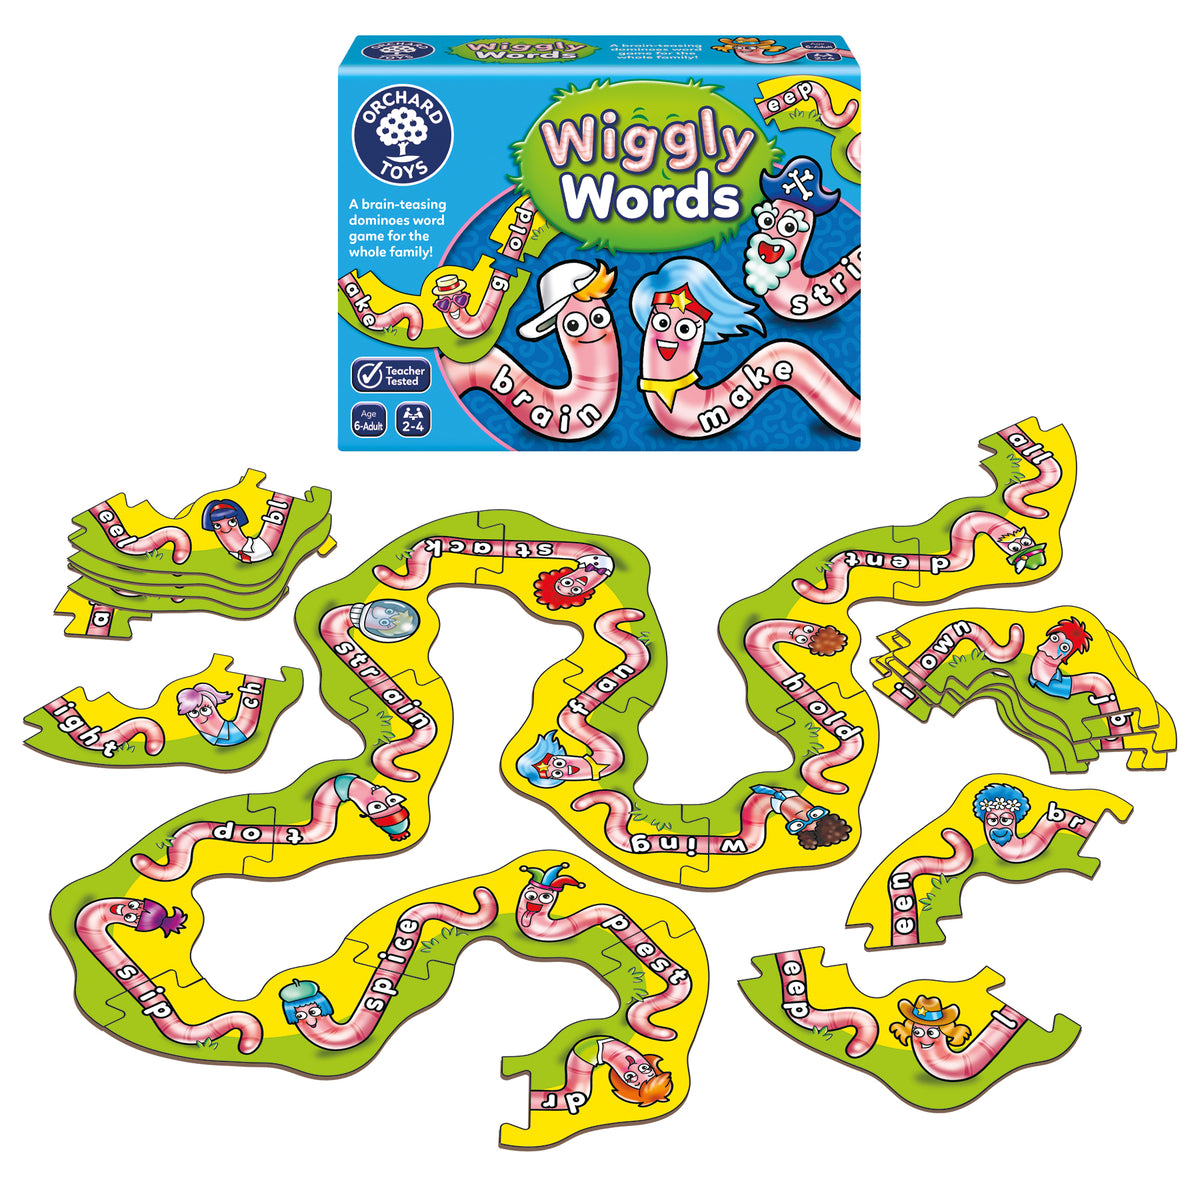 Orchard Toys - Wiggly Words product image 2